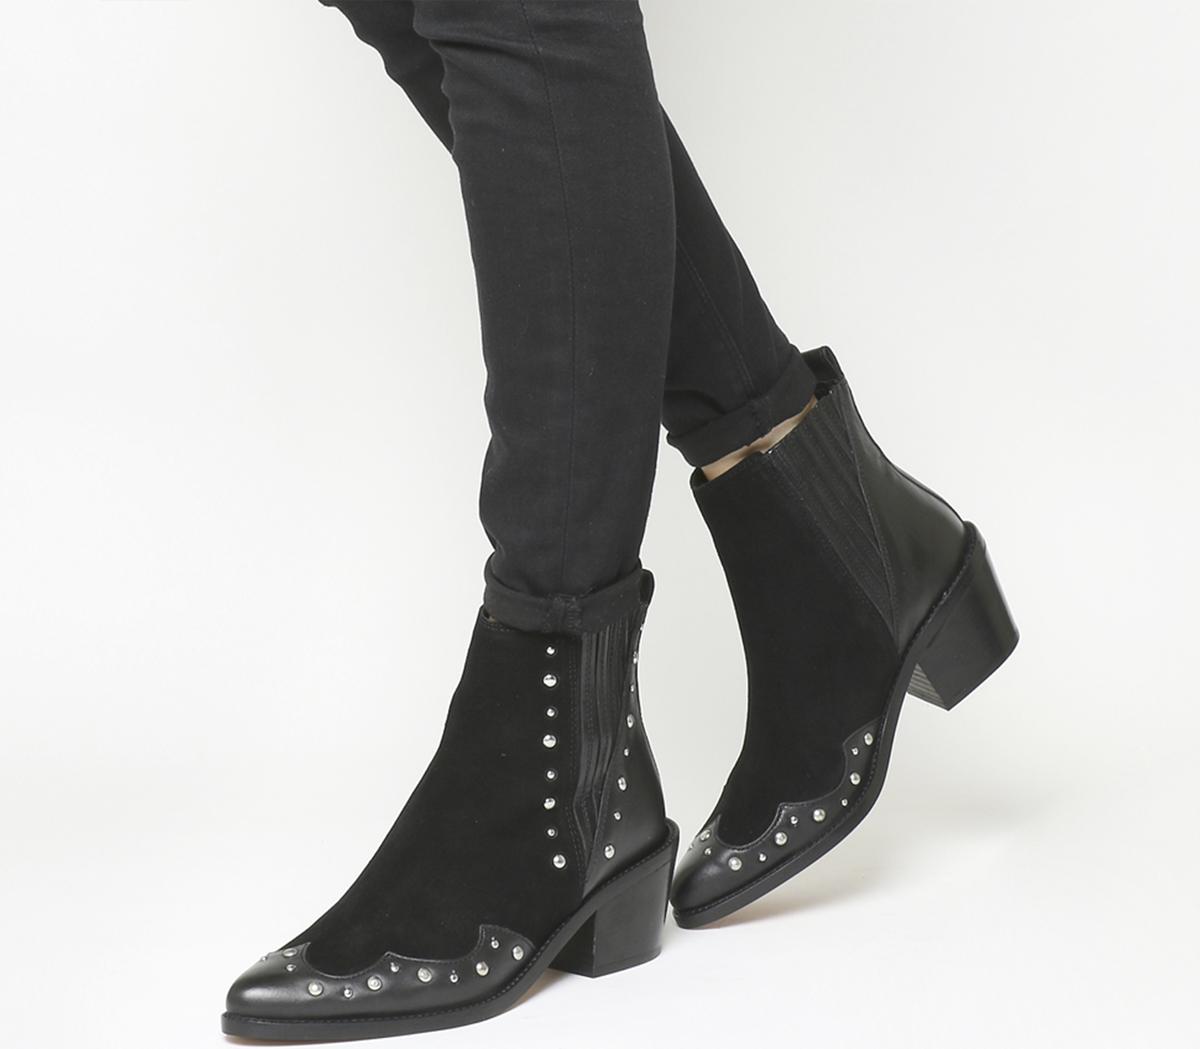 chelsea boots with black studs